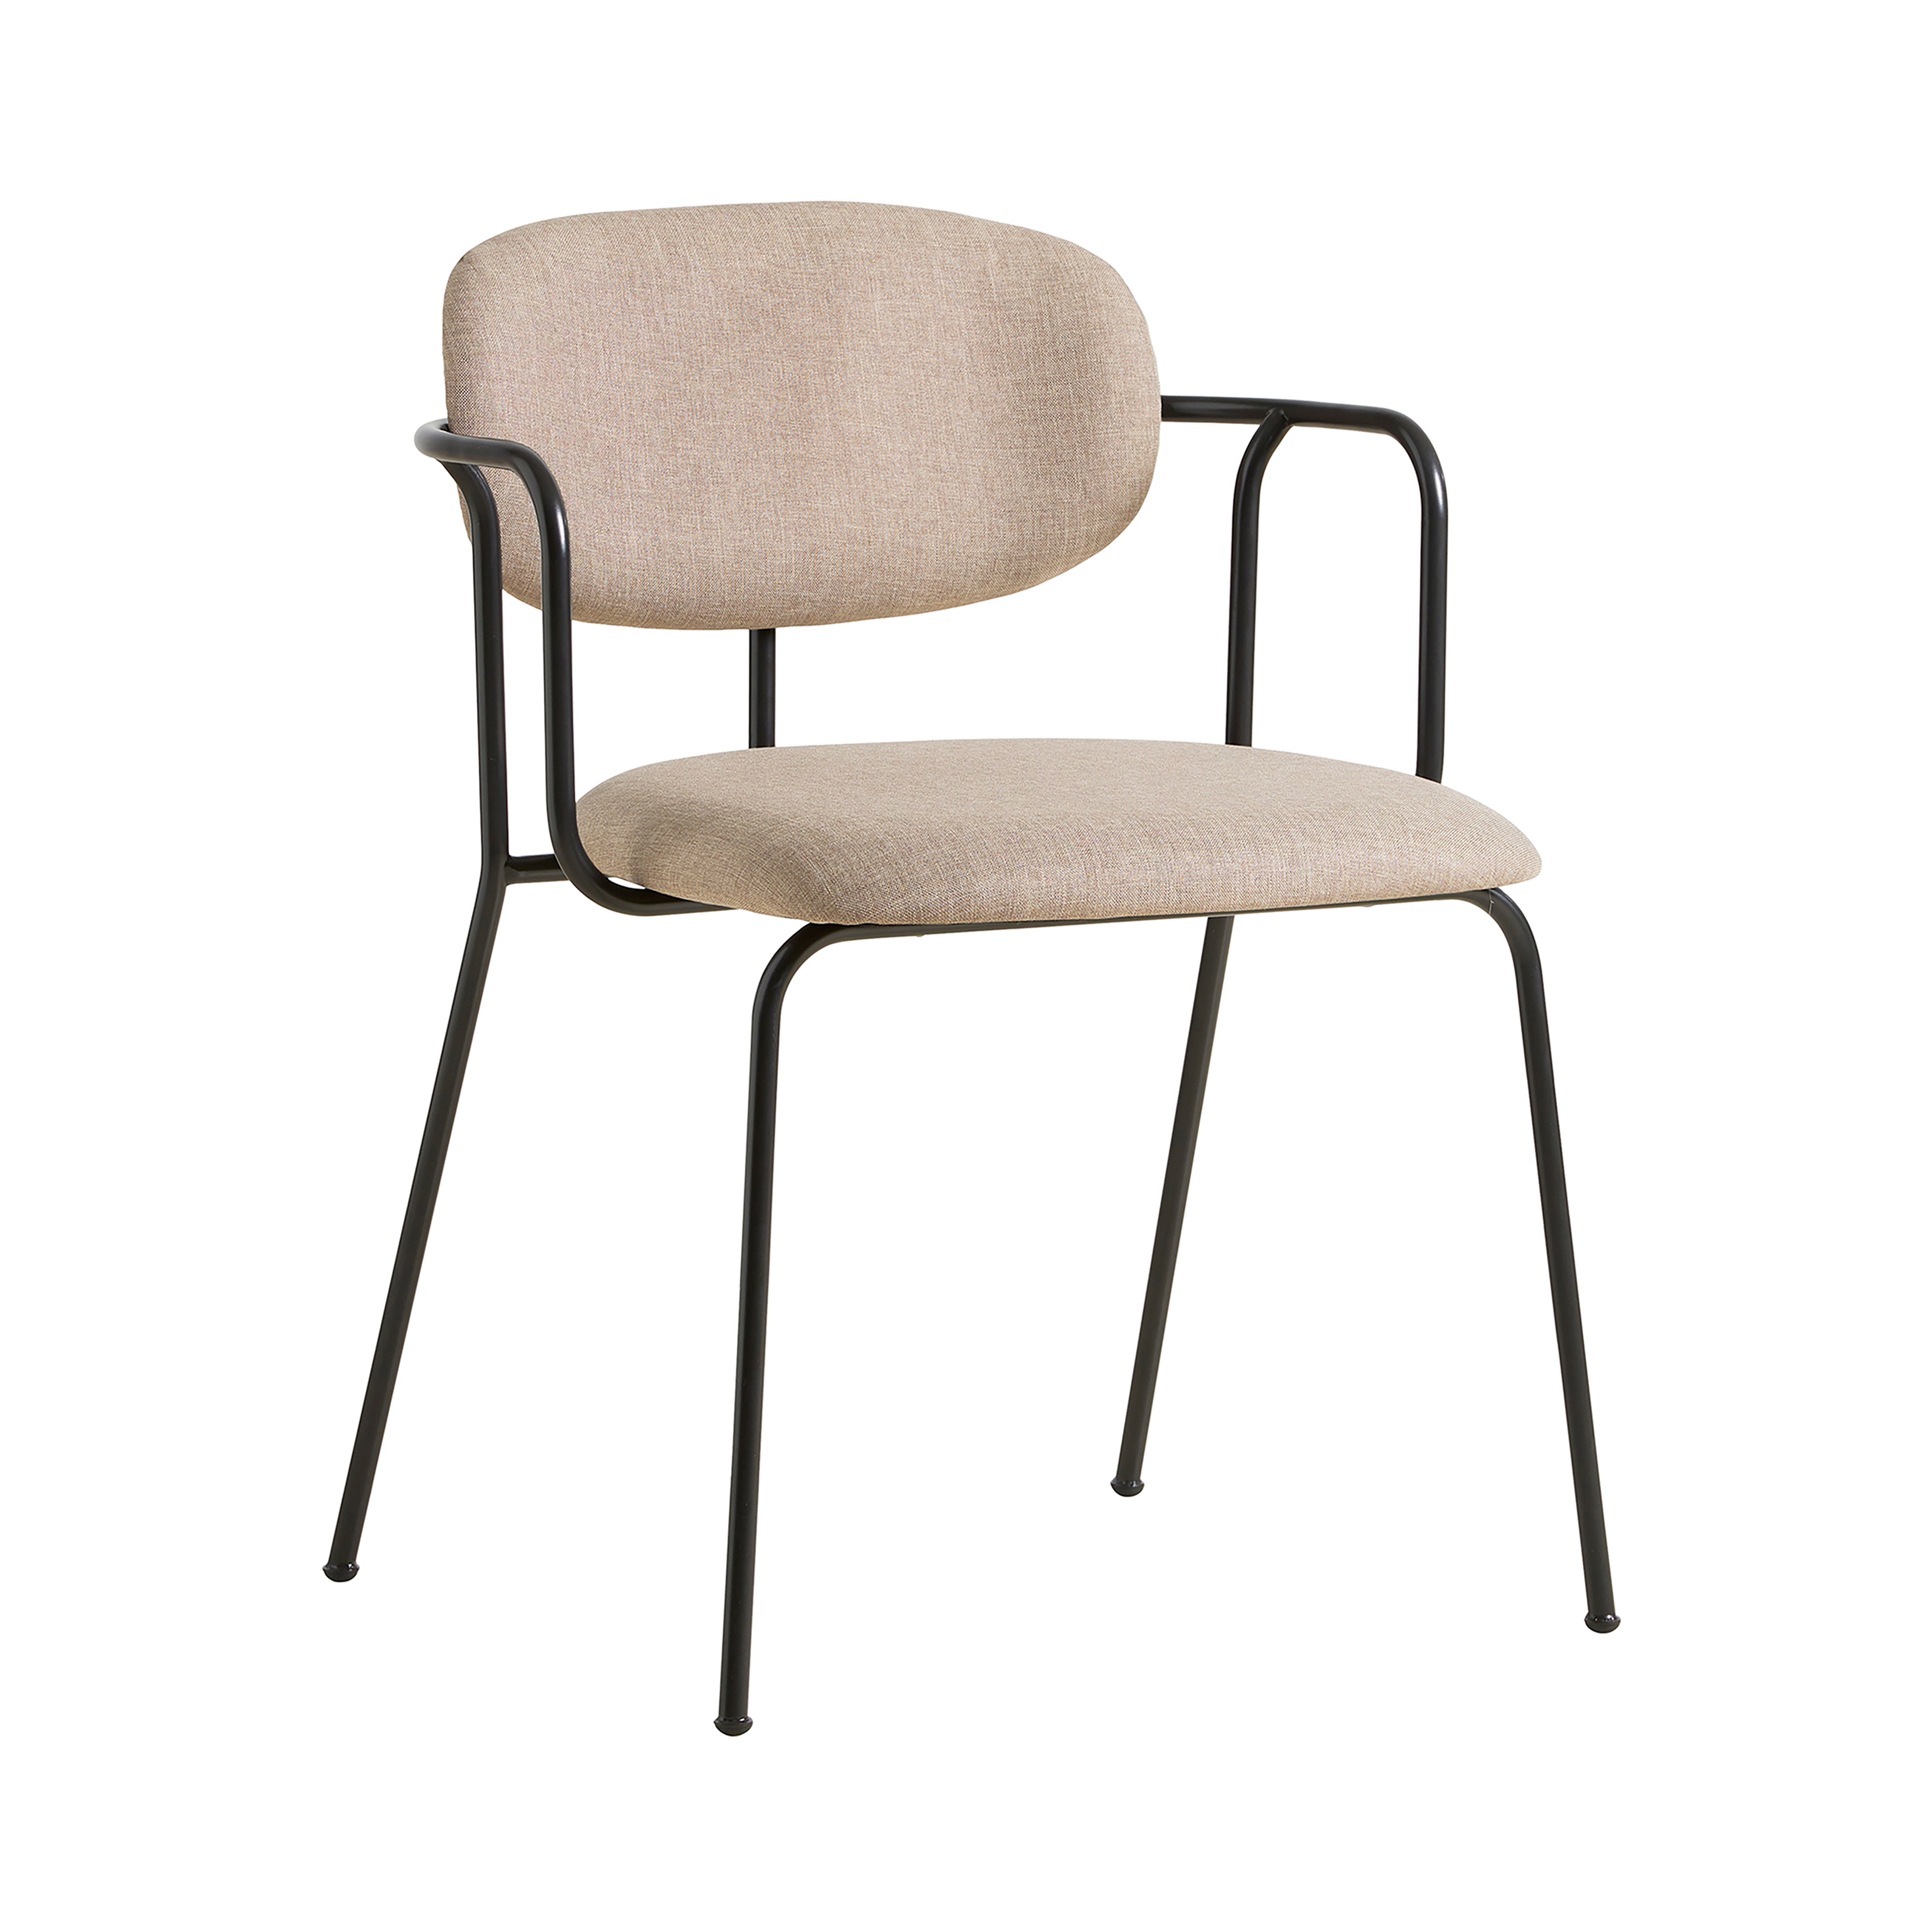 Frame Dining Chair: Beige